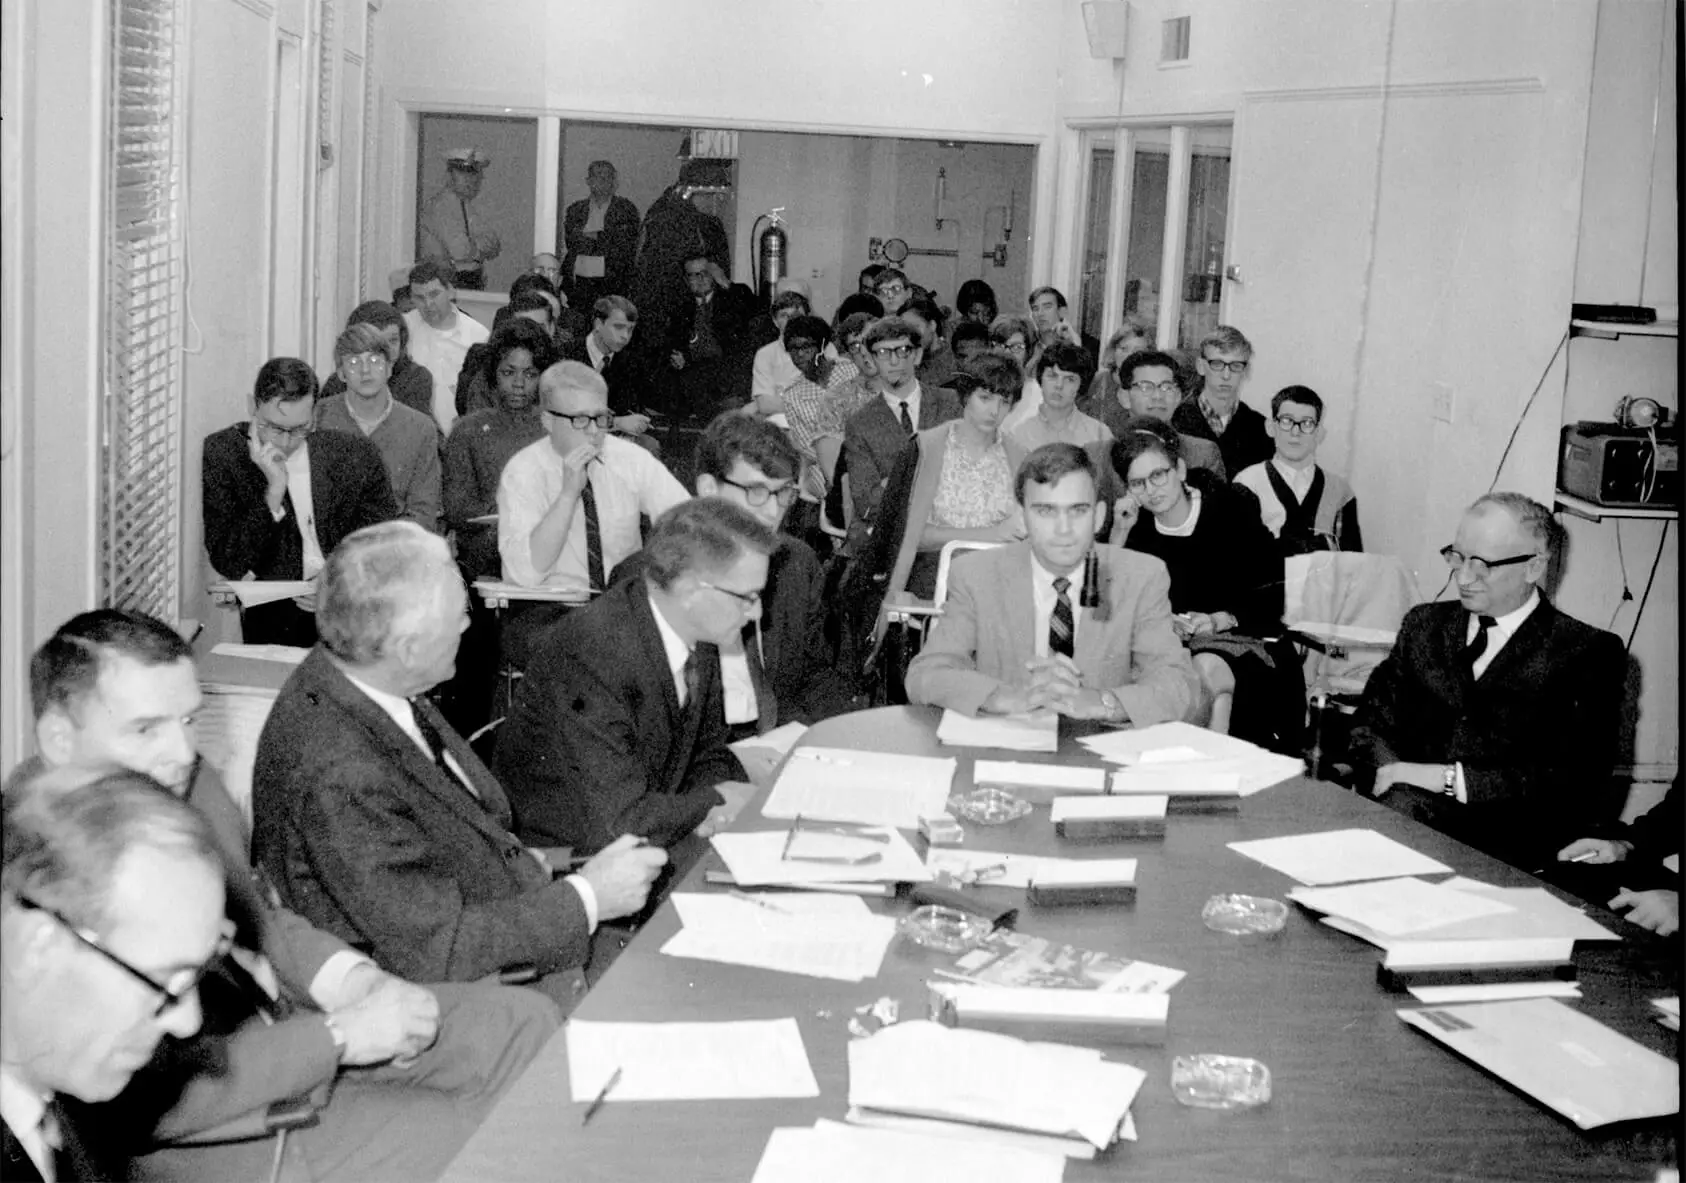 A group of older white men dressed in suits, seated at a conference table with papers scattered around. In the background are 20 or so seated individuals.